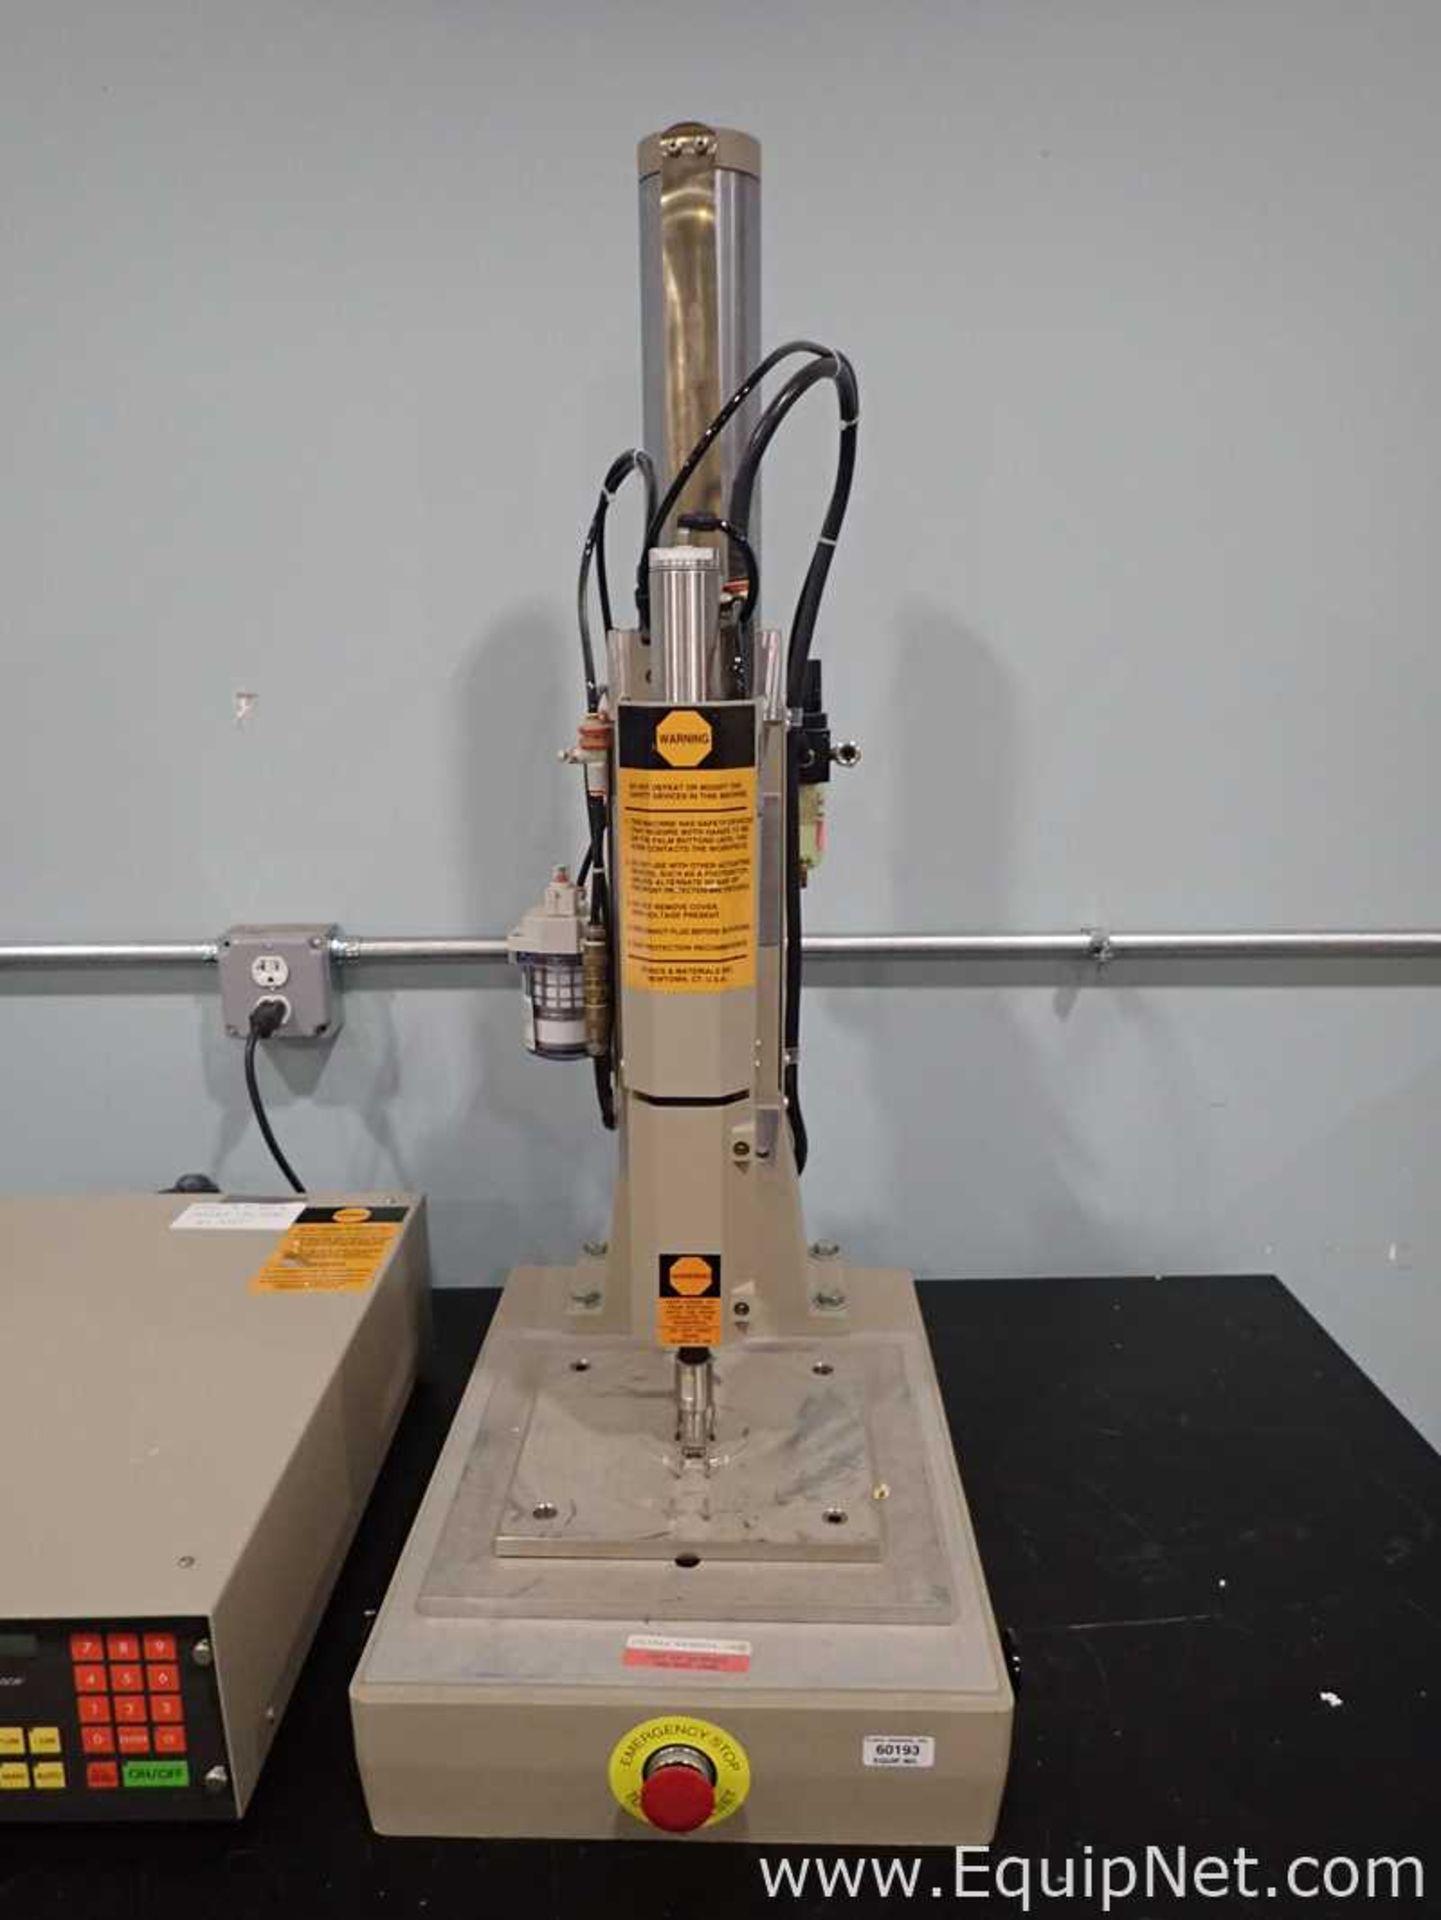 Sonics and Materials 4095 Pneumatic Press with Microsonic Processor for Ultrasonic Plastic Assembly - Image 2 of 13